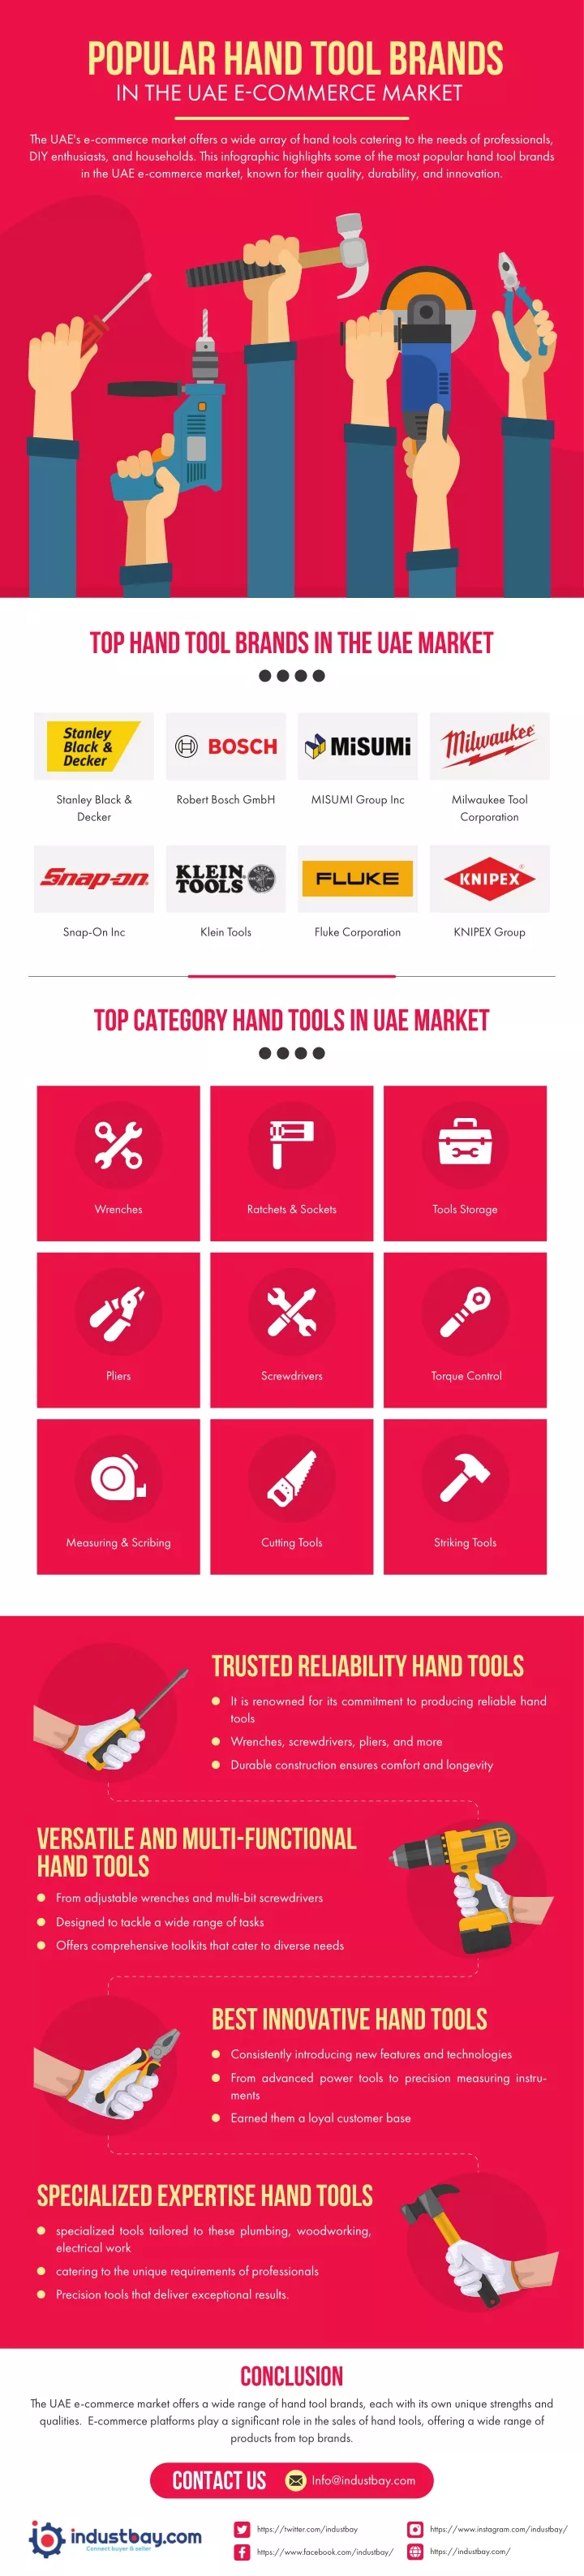 popular hand tool brands in the uae e commerce